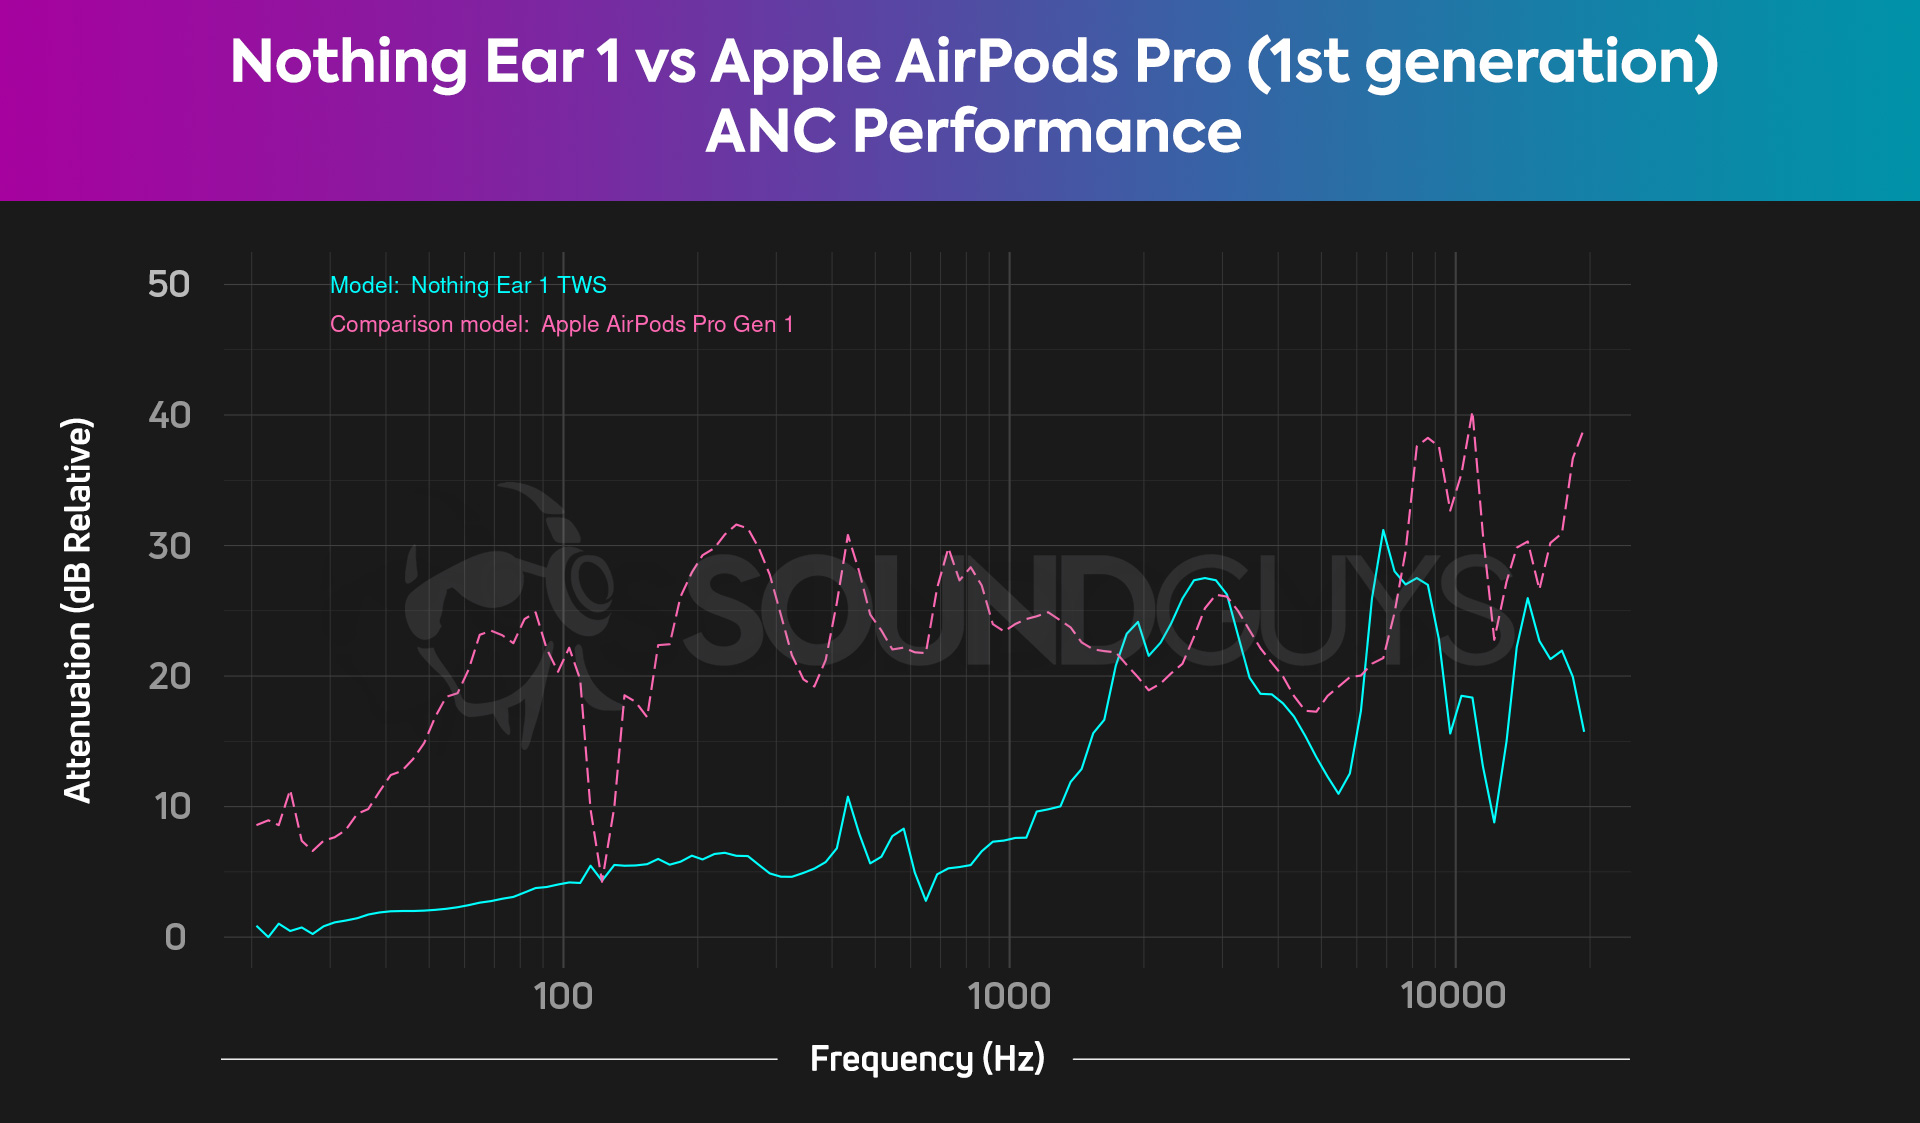 A chart showing the gross attenuation of the Apple AirPods Pro in comparison to the Nothing Ear 1.